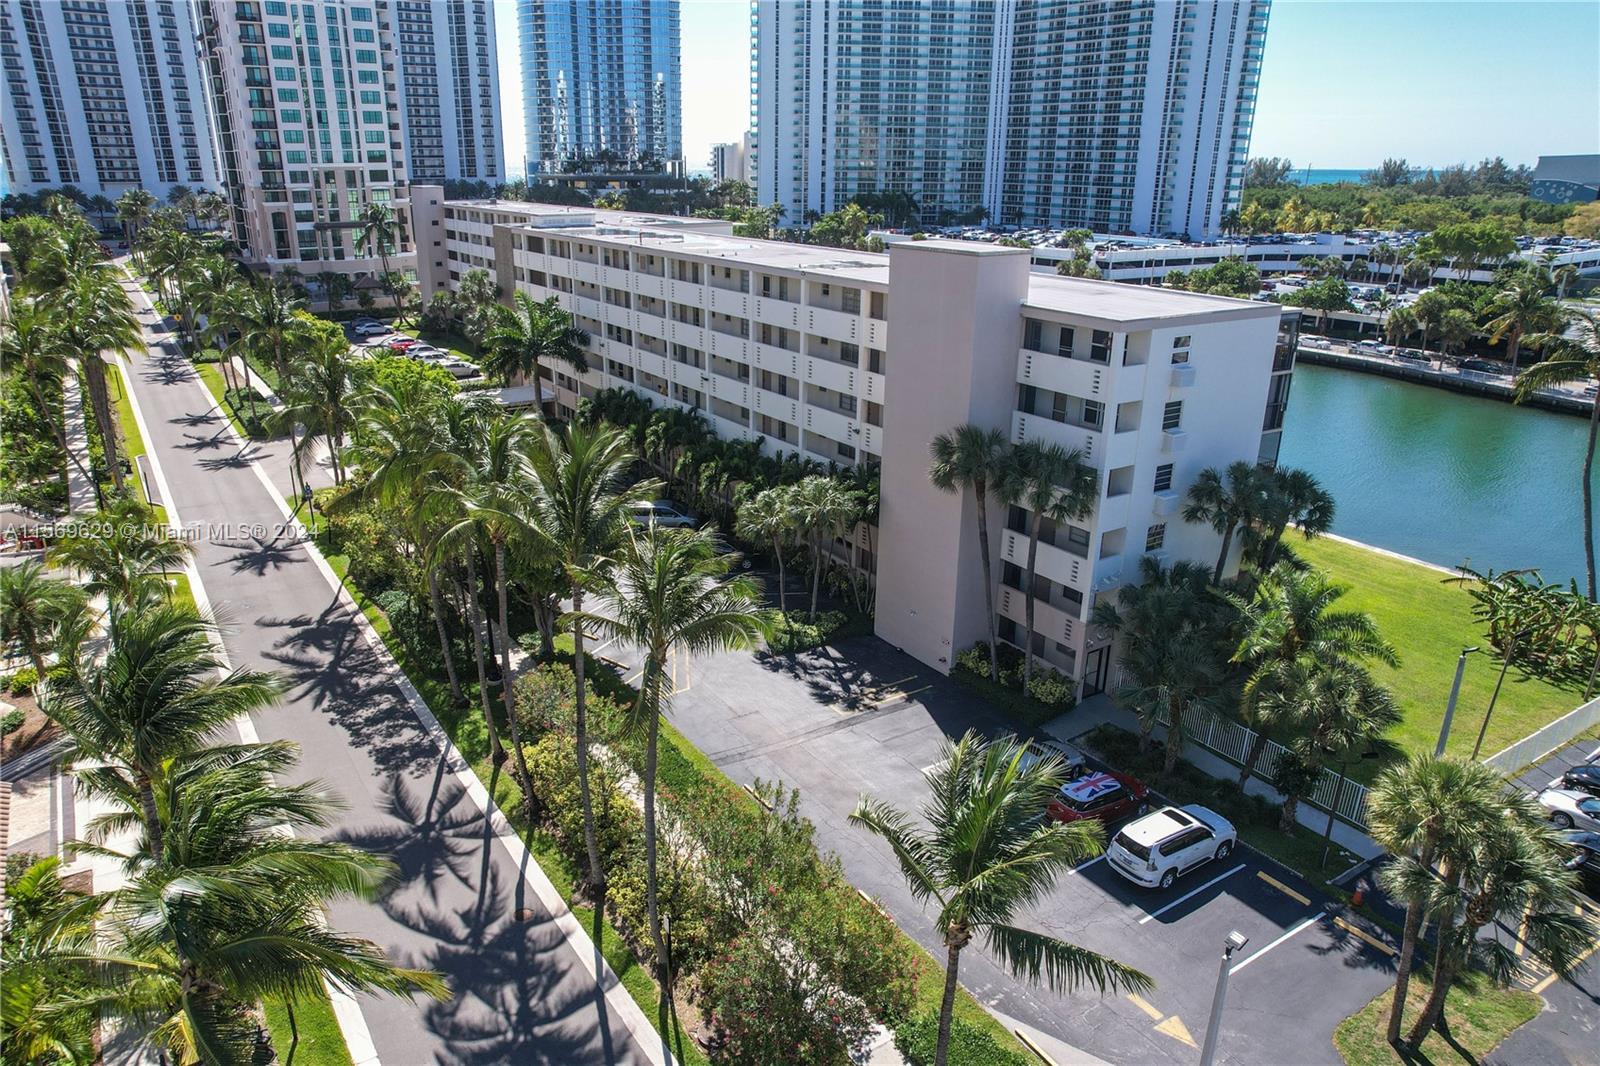 Photo of 220 E Kings Point Dr #304 in Sunny Isles Beach, FL